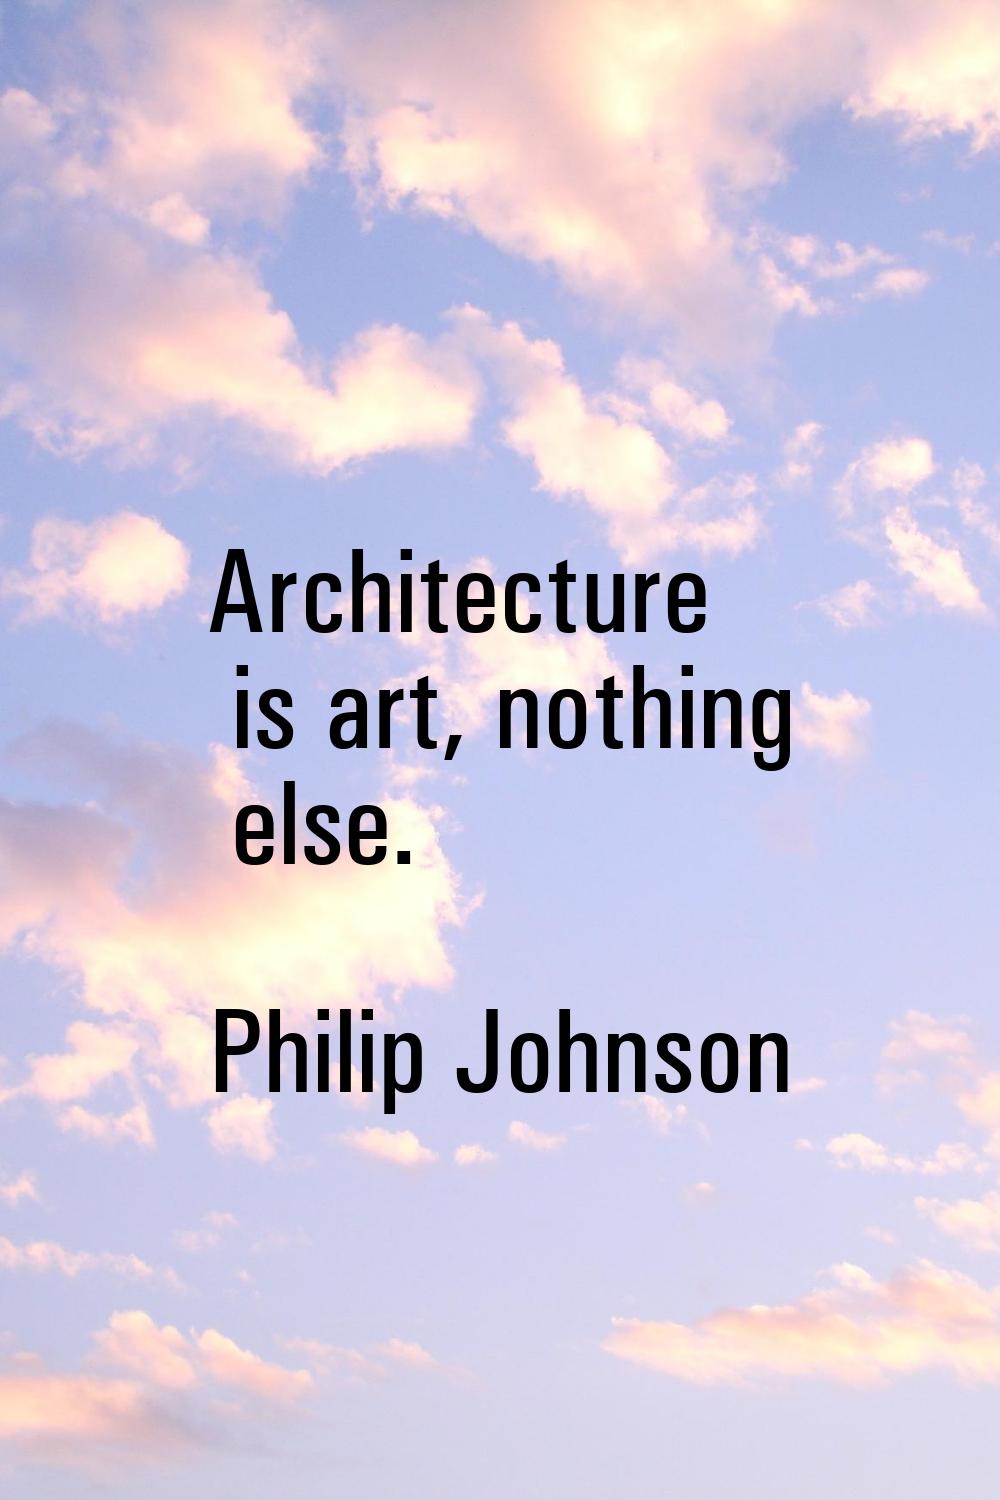 Architecture is art, nothing else.